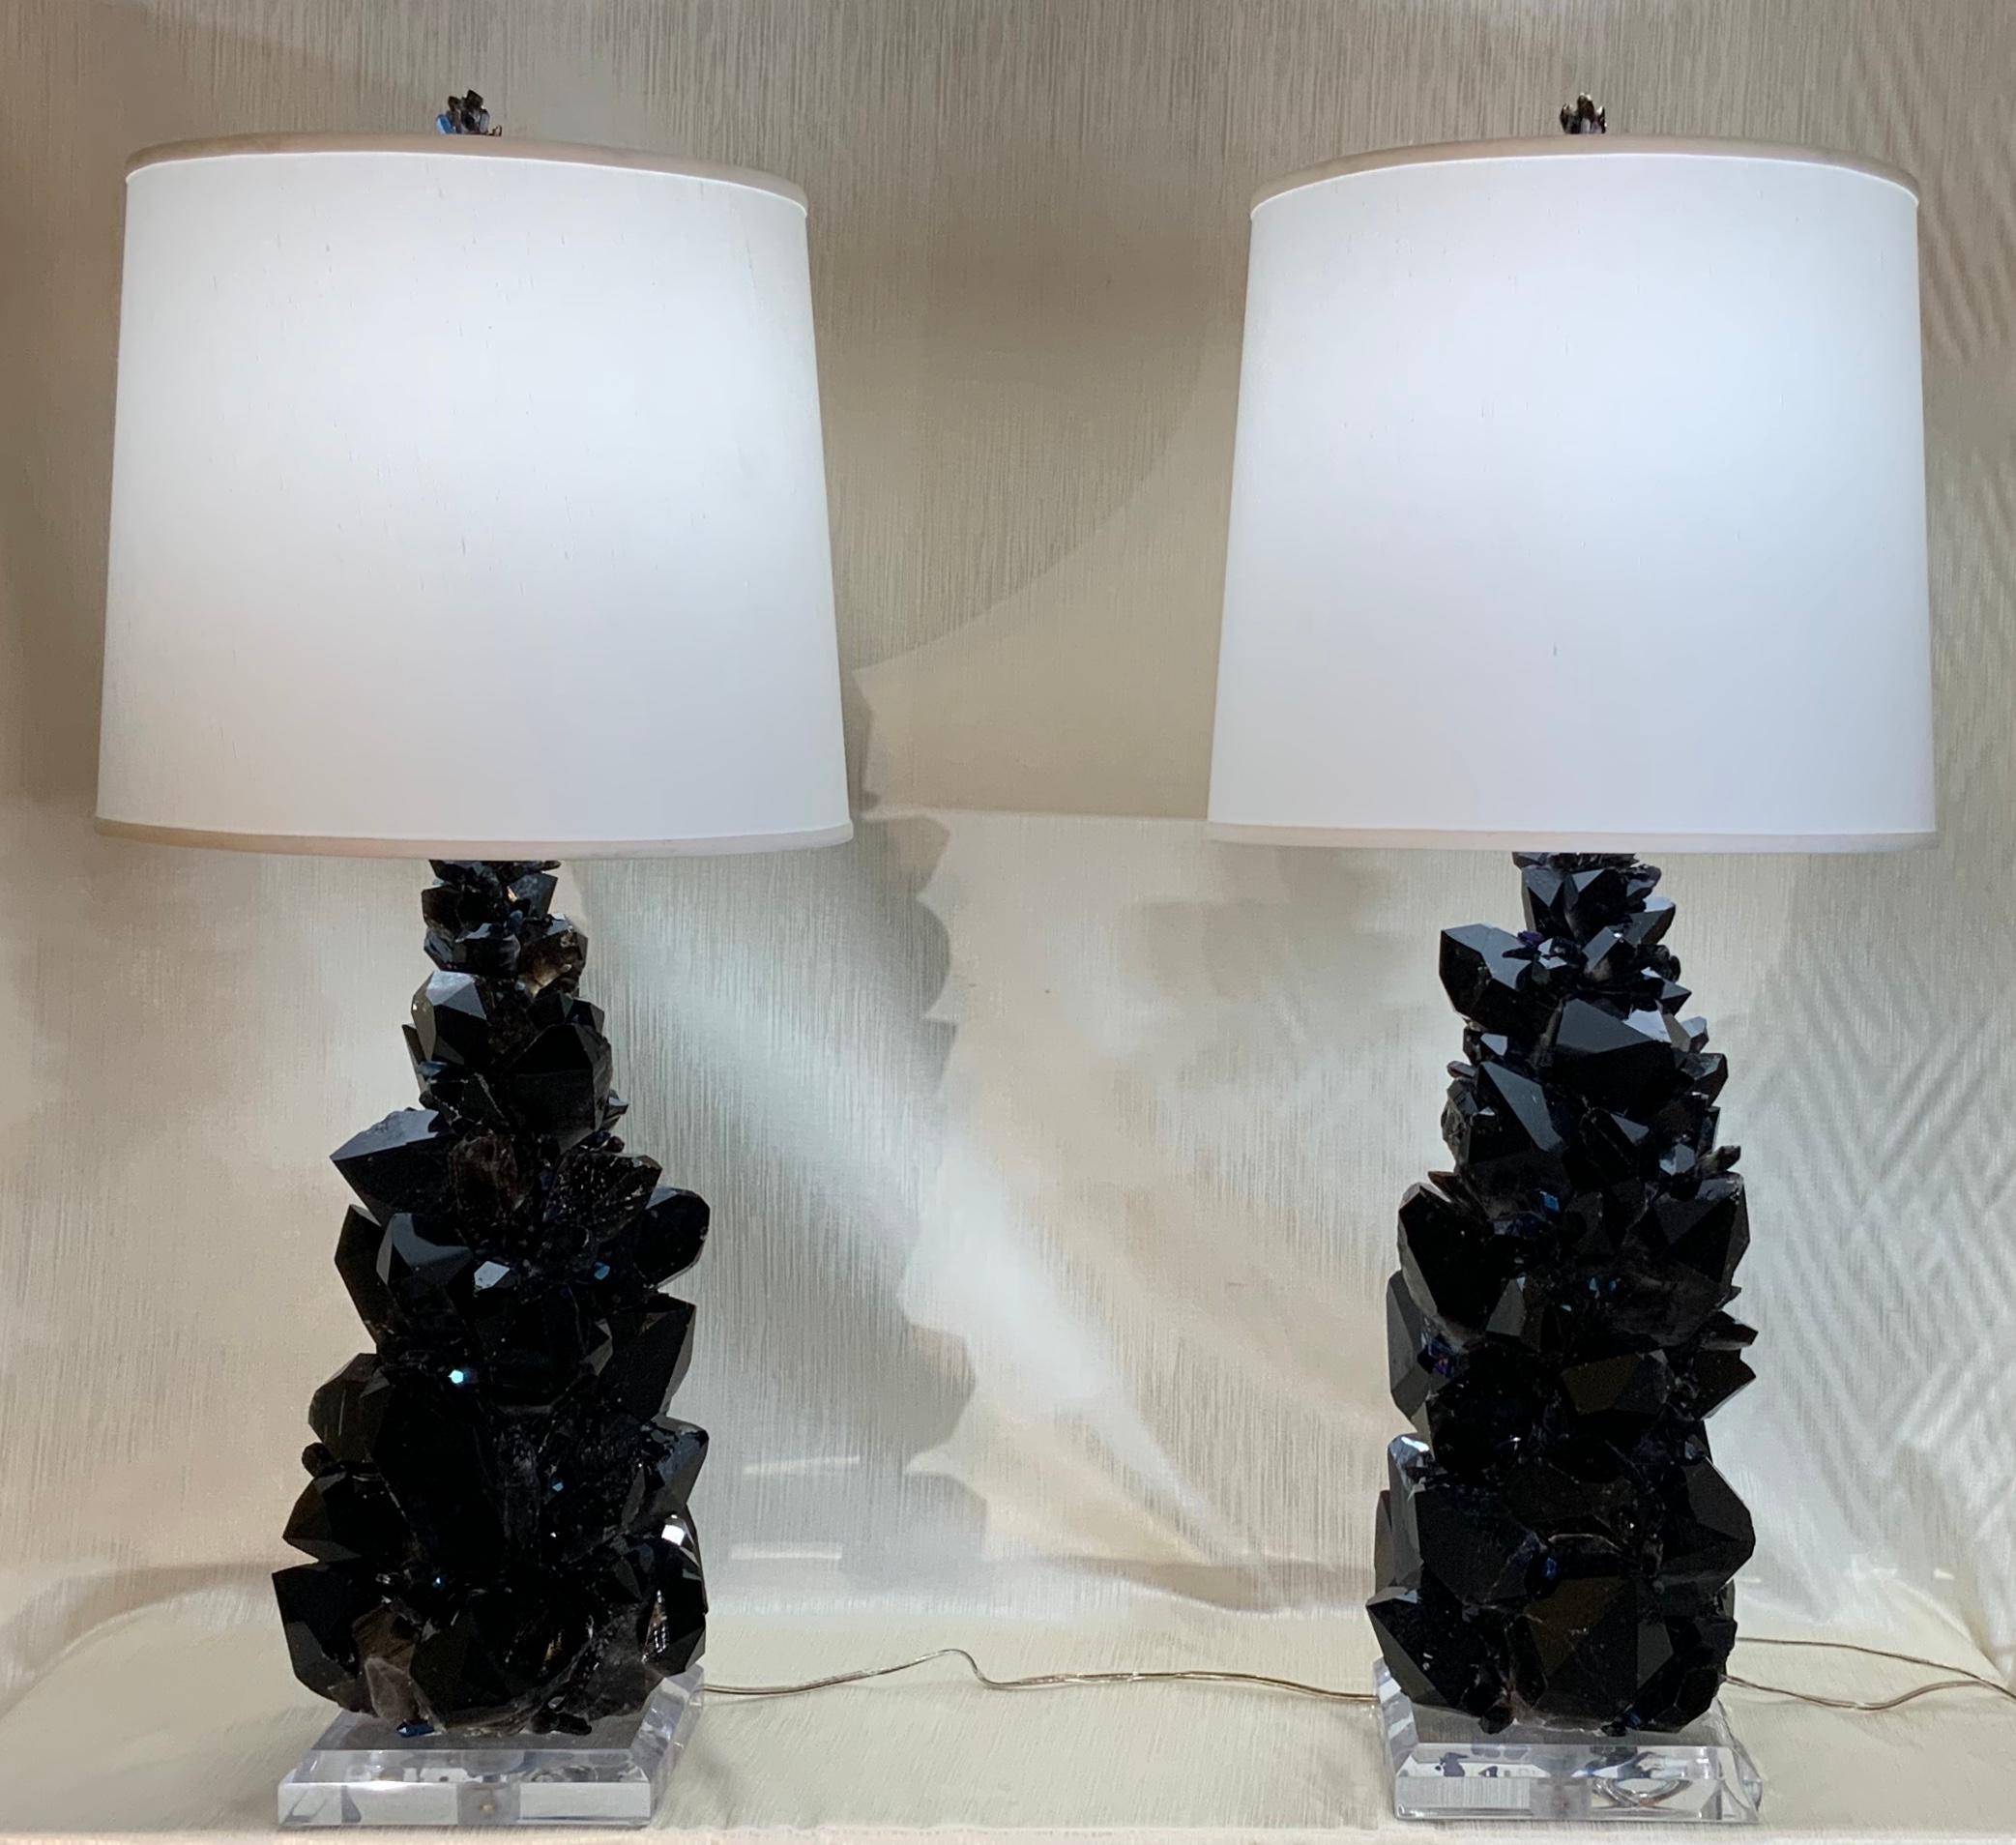 Pair of Large Black Rock Quartz Crystal Table Lamps by, Joseph Malekan For Sale 5